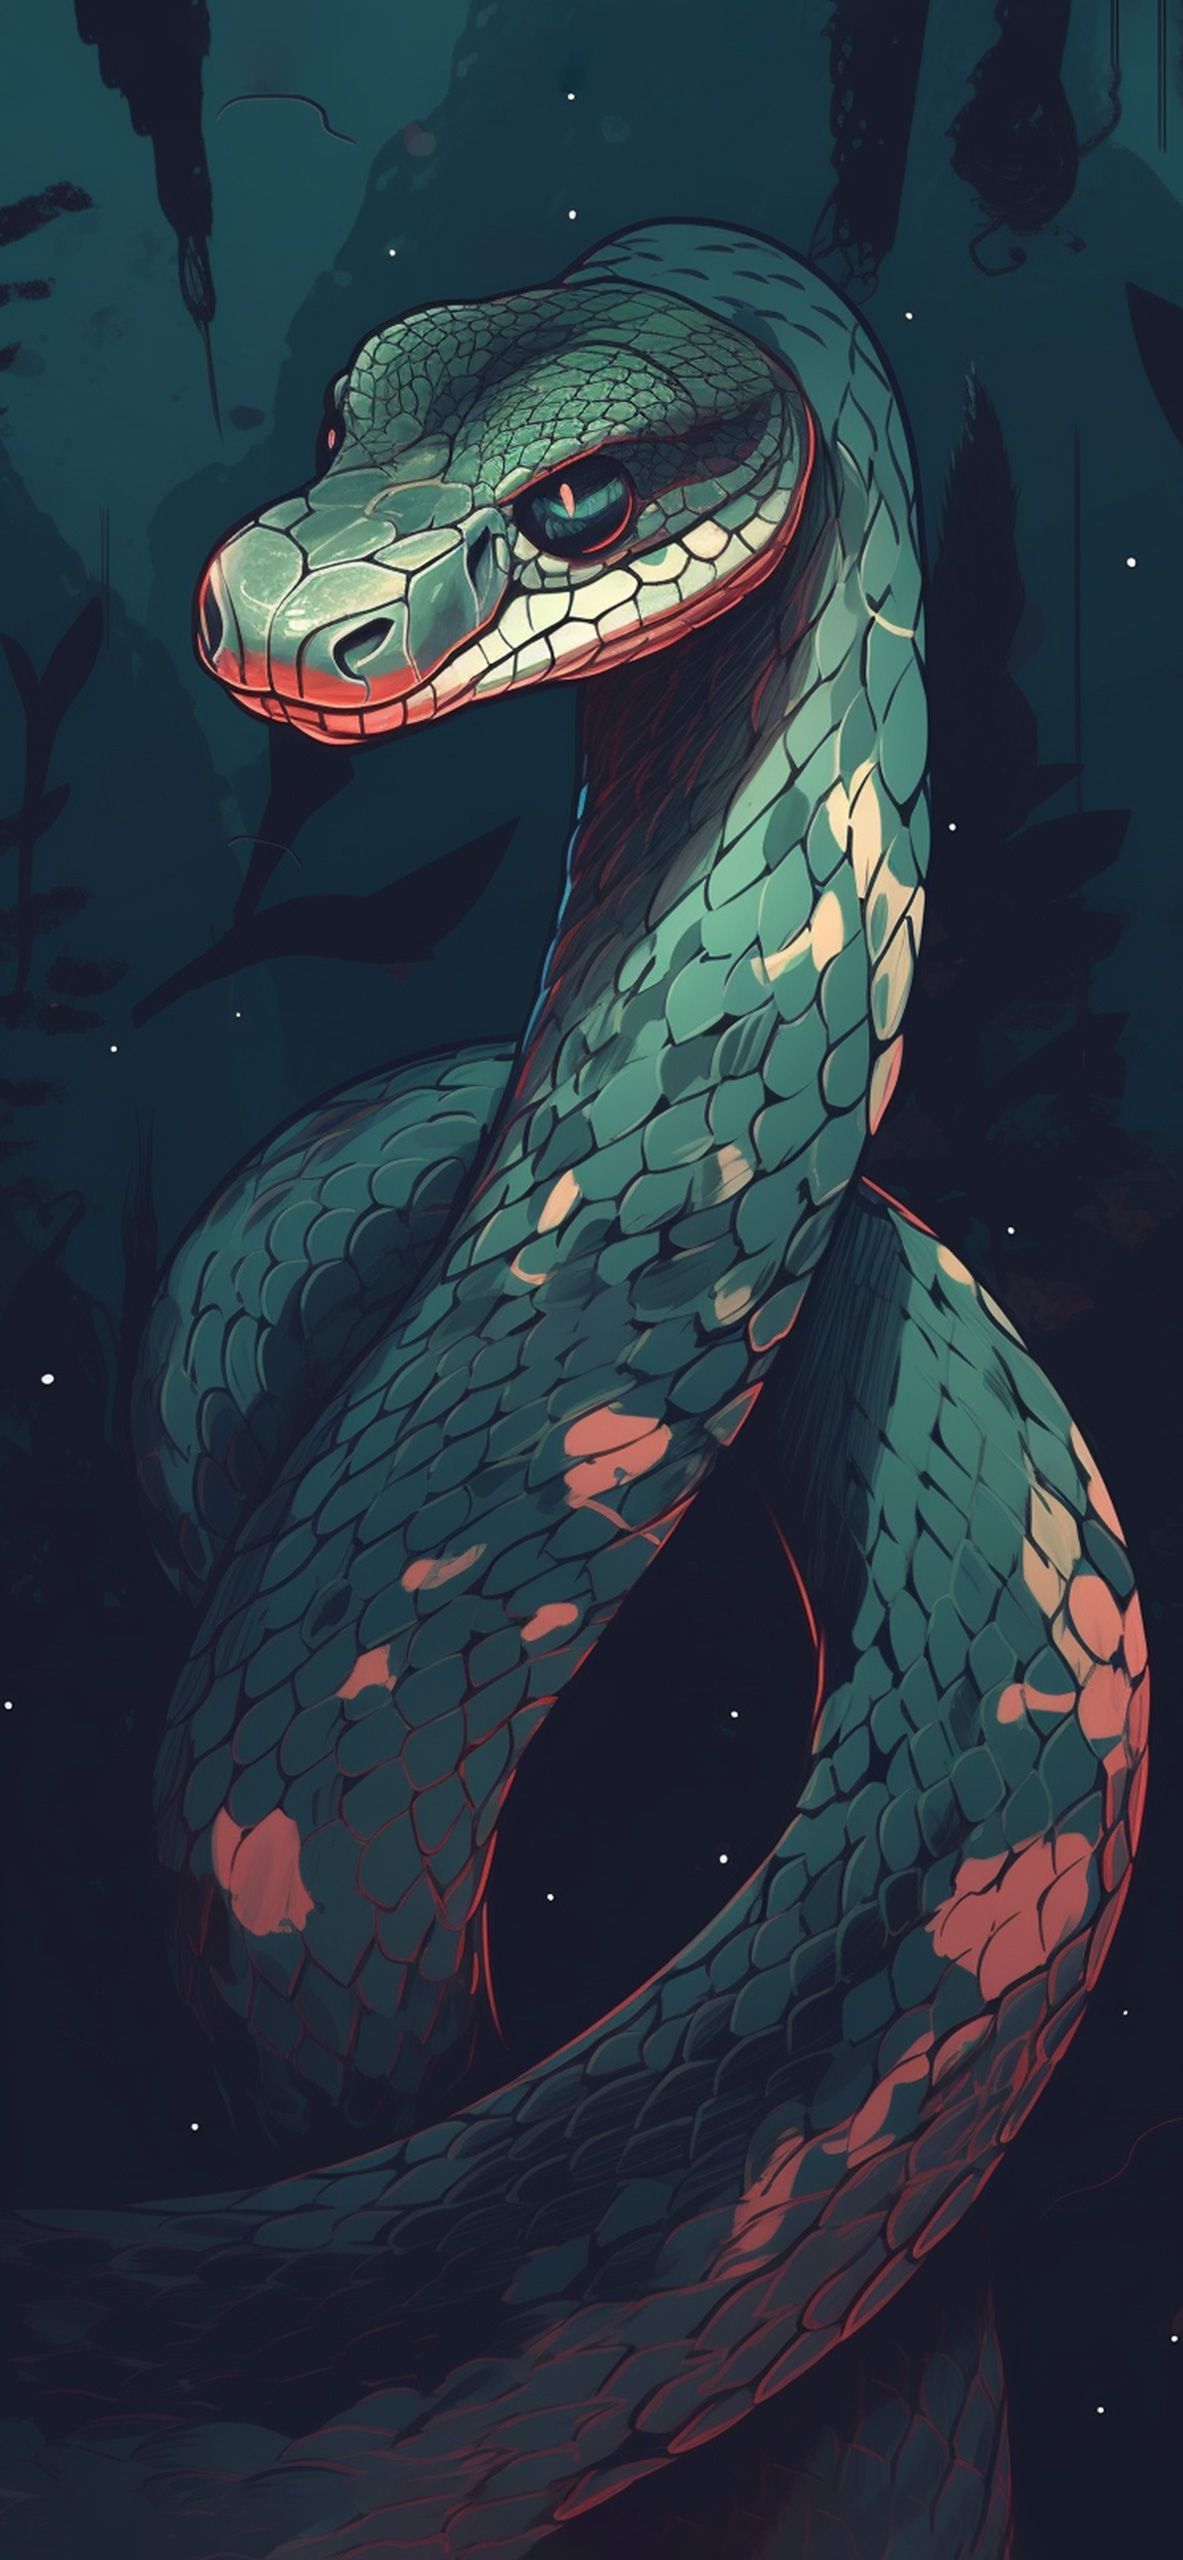 IPhone wallpaper with snake, in the dark, art - Snake